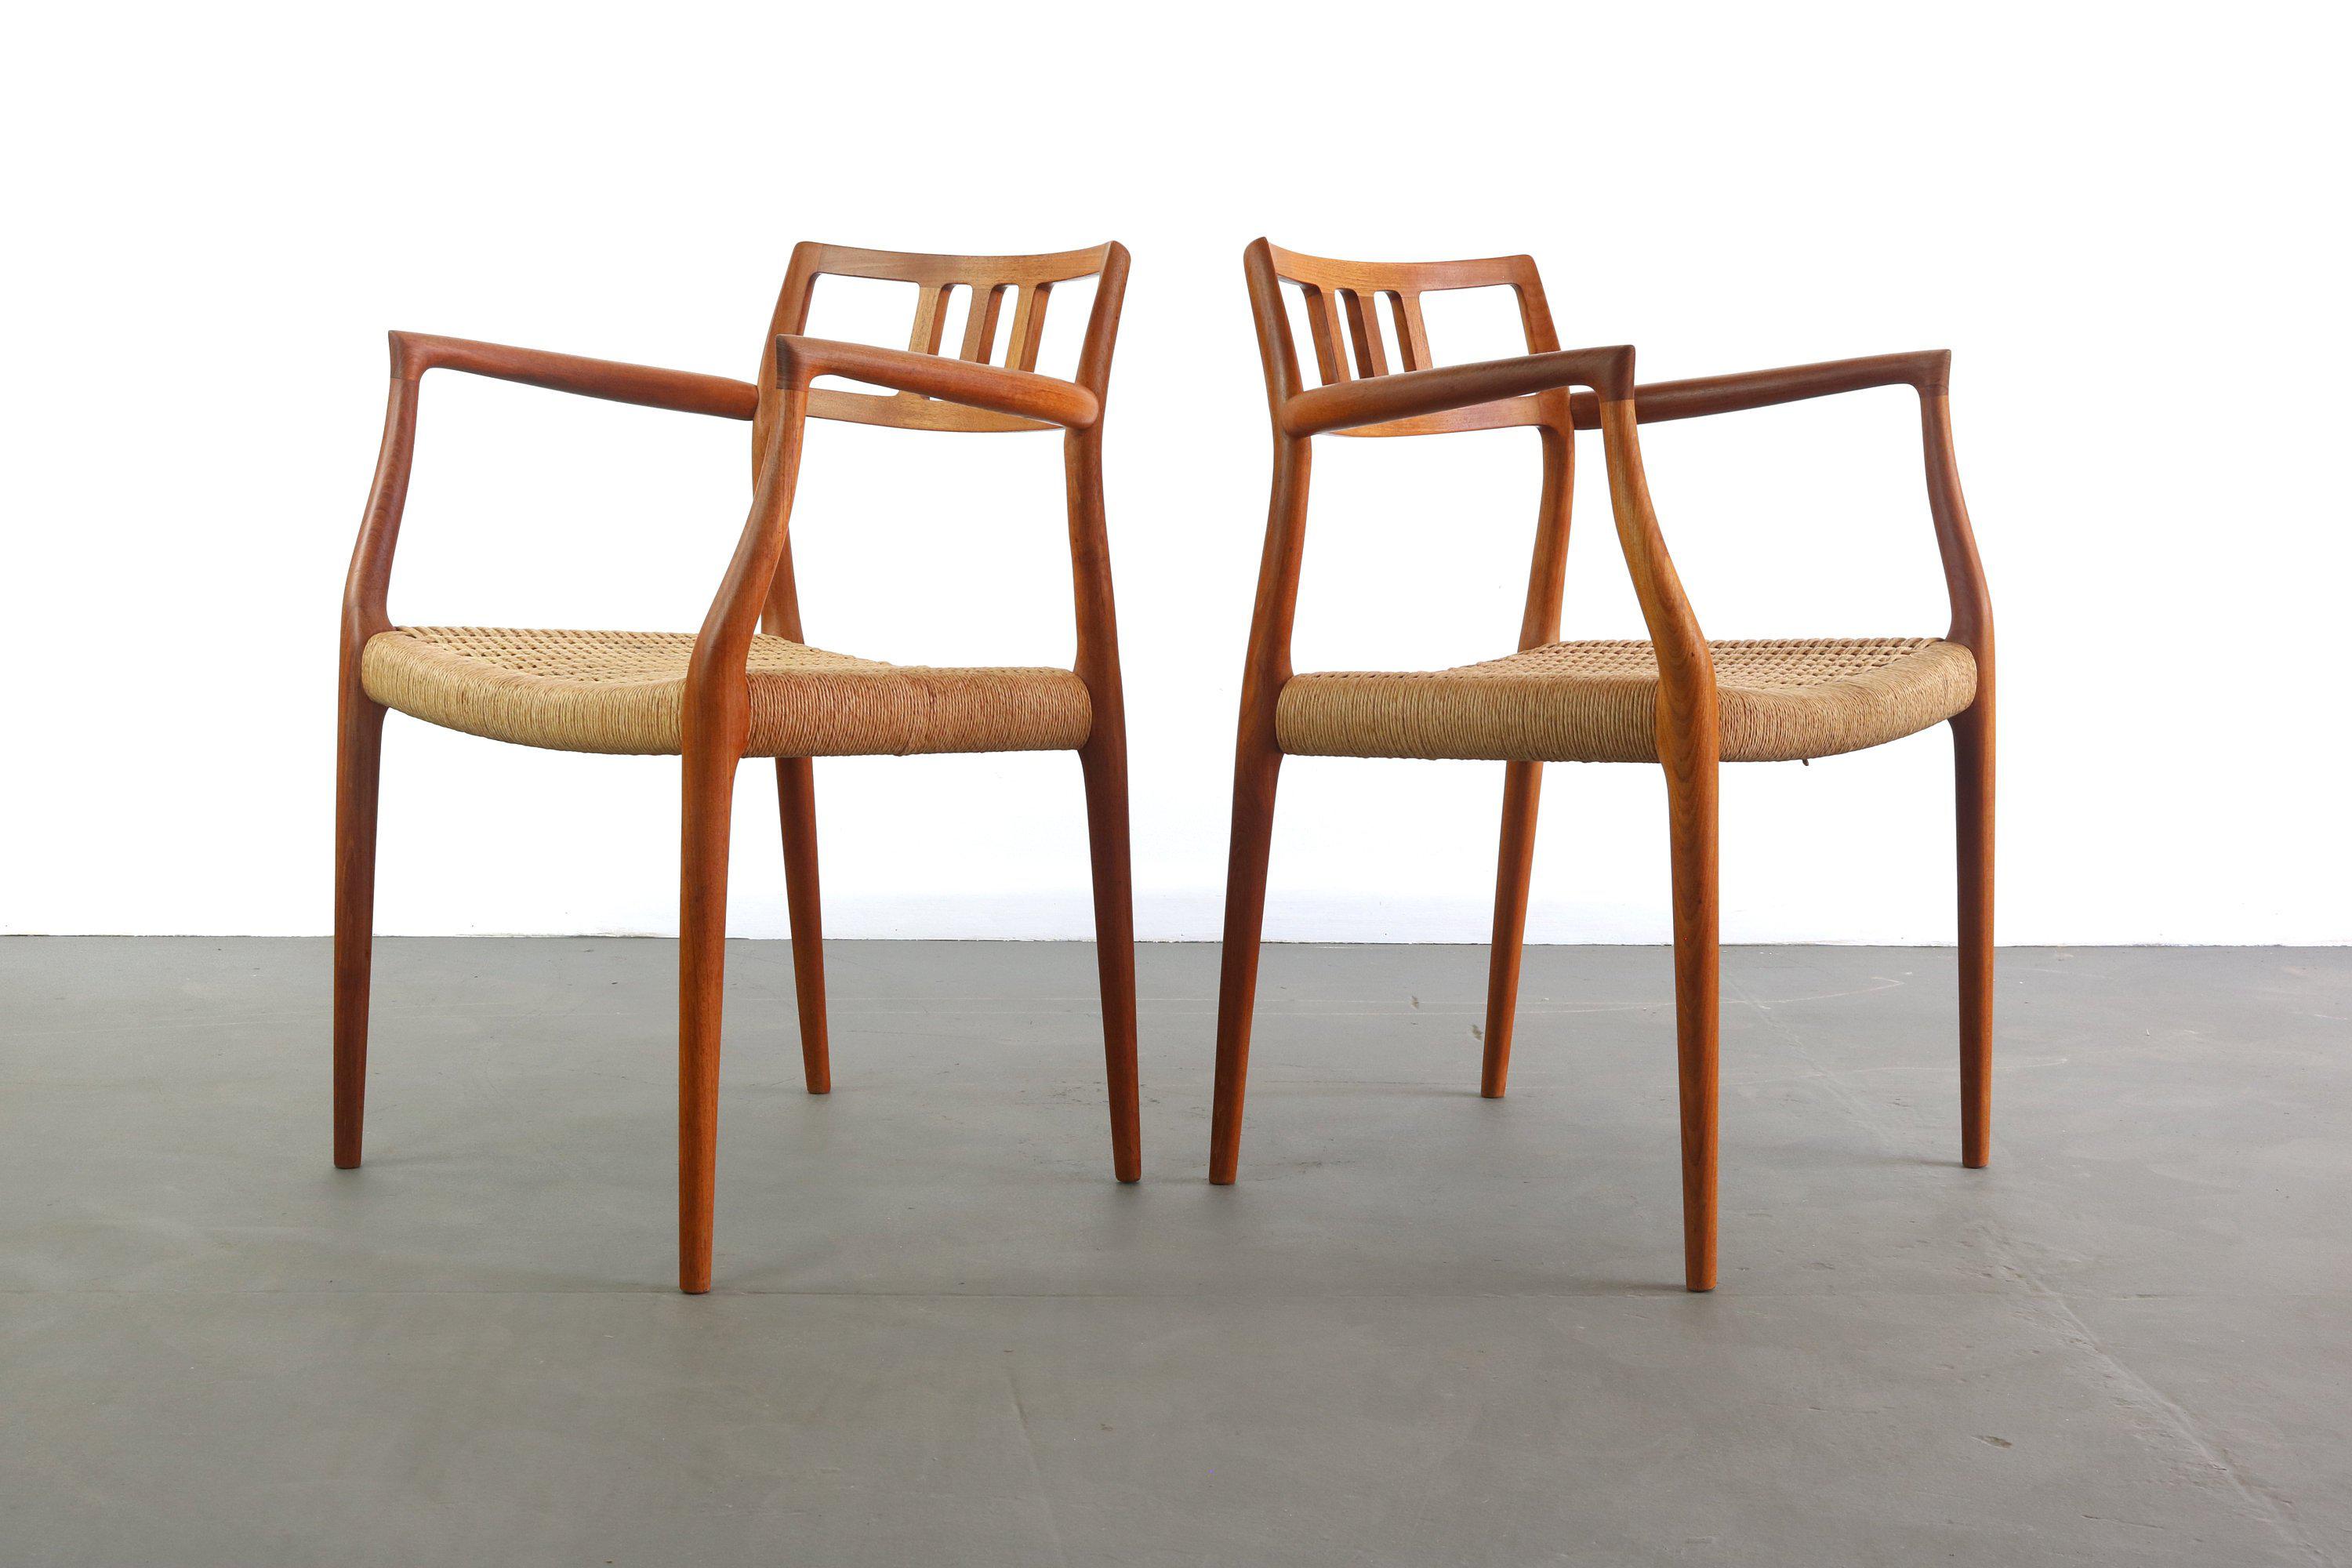 ON HOLD - A Single Niels O. Moller for J.L. Moller Chair Dining Chair in  Teak, Model 64